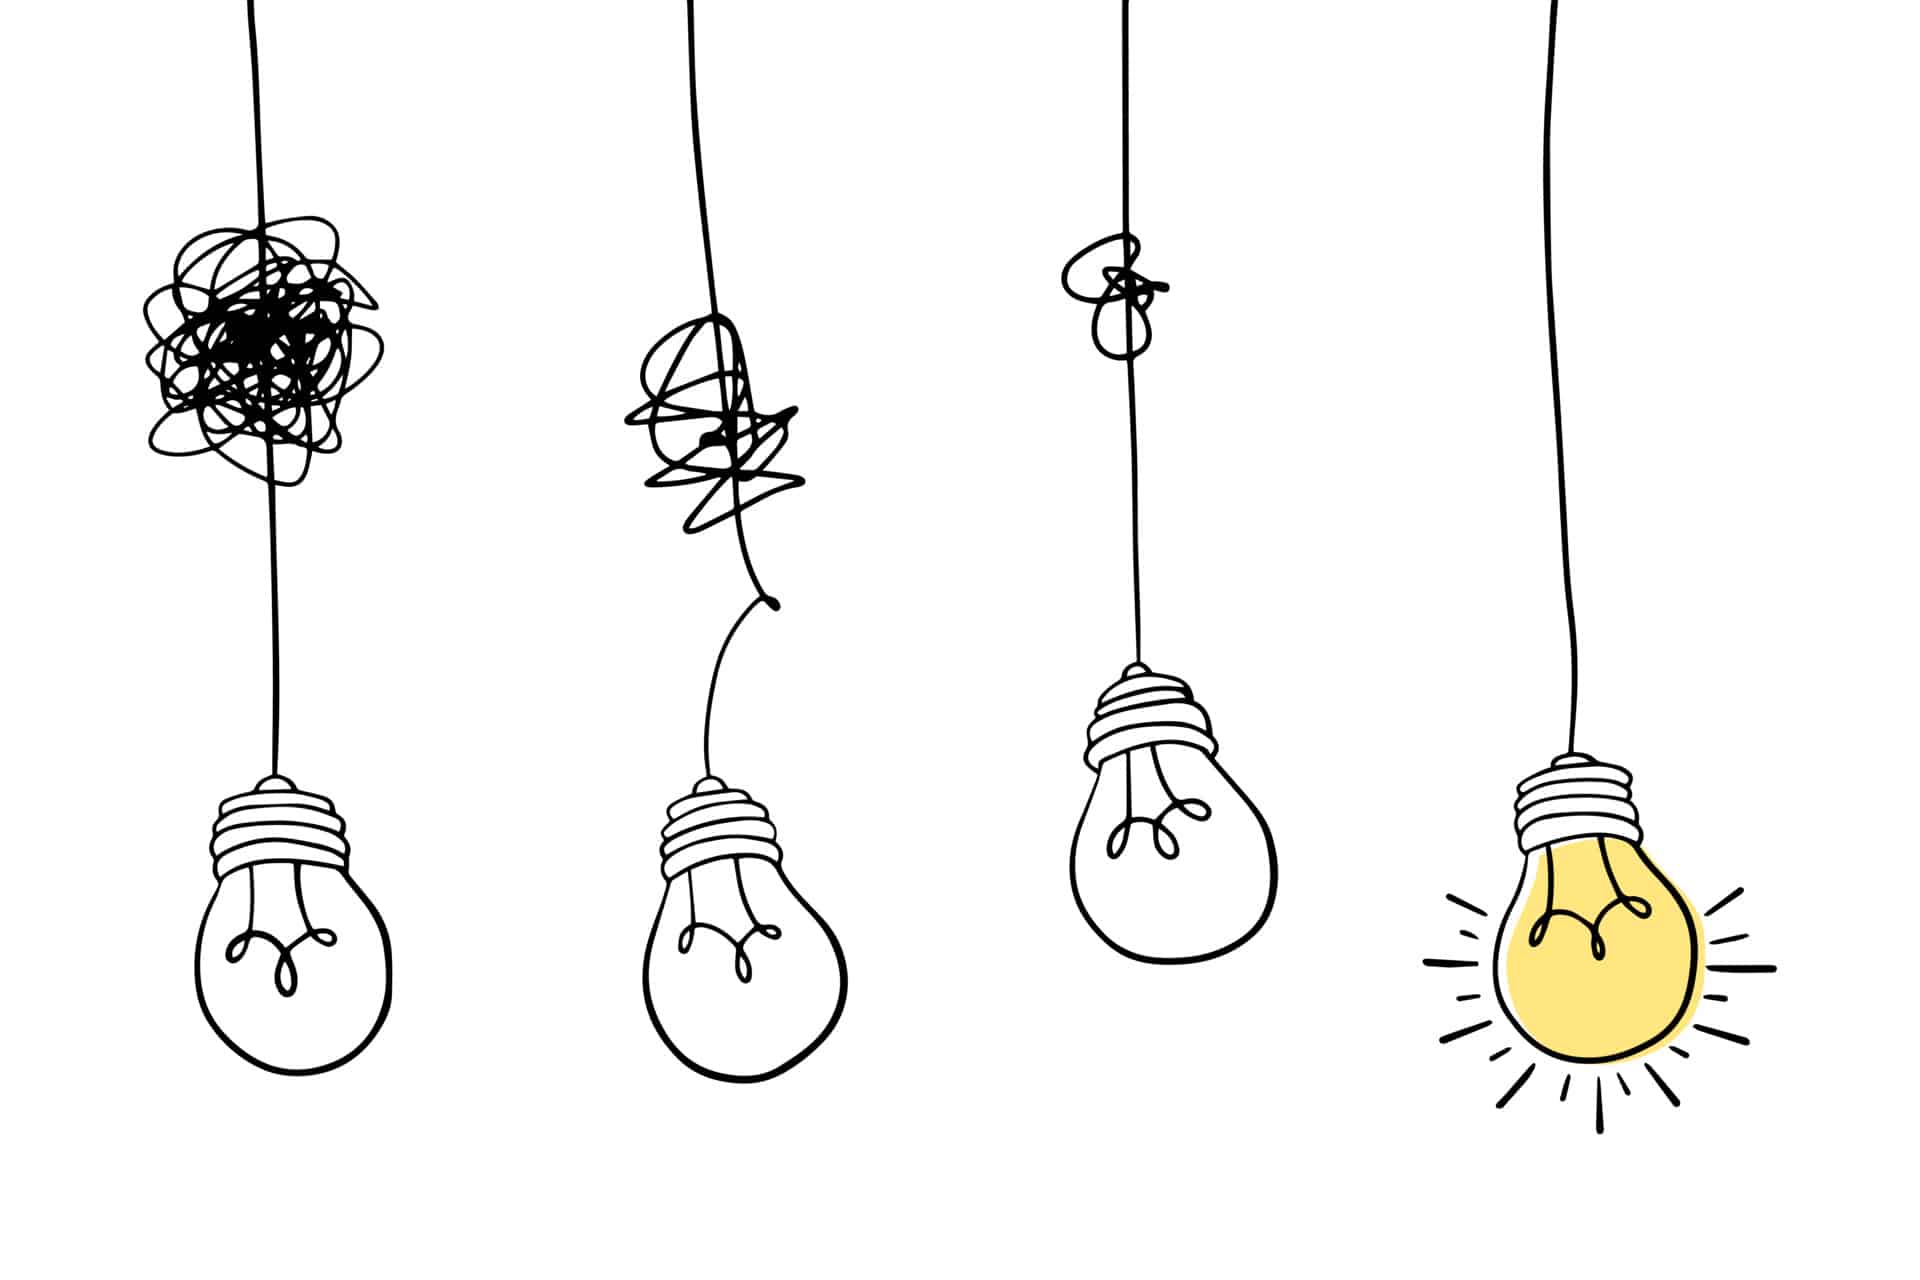 Image of 4 lighbulbs with 3 being tangled and one untangled to signify clarity. the untangled lightbulb is on while the others are off